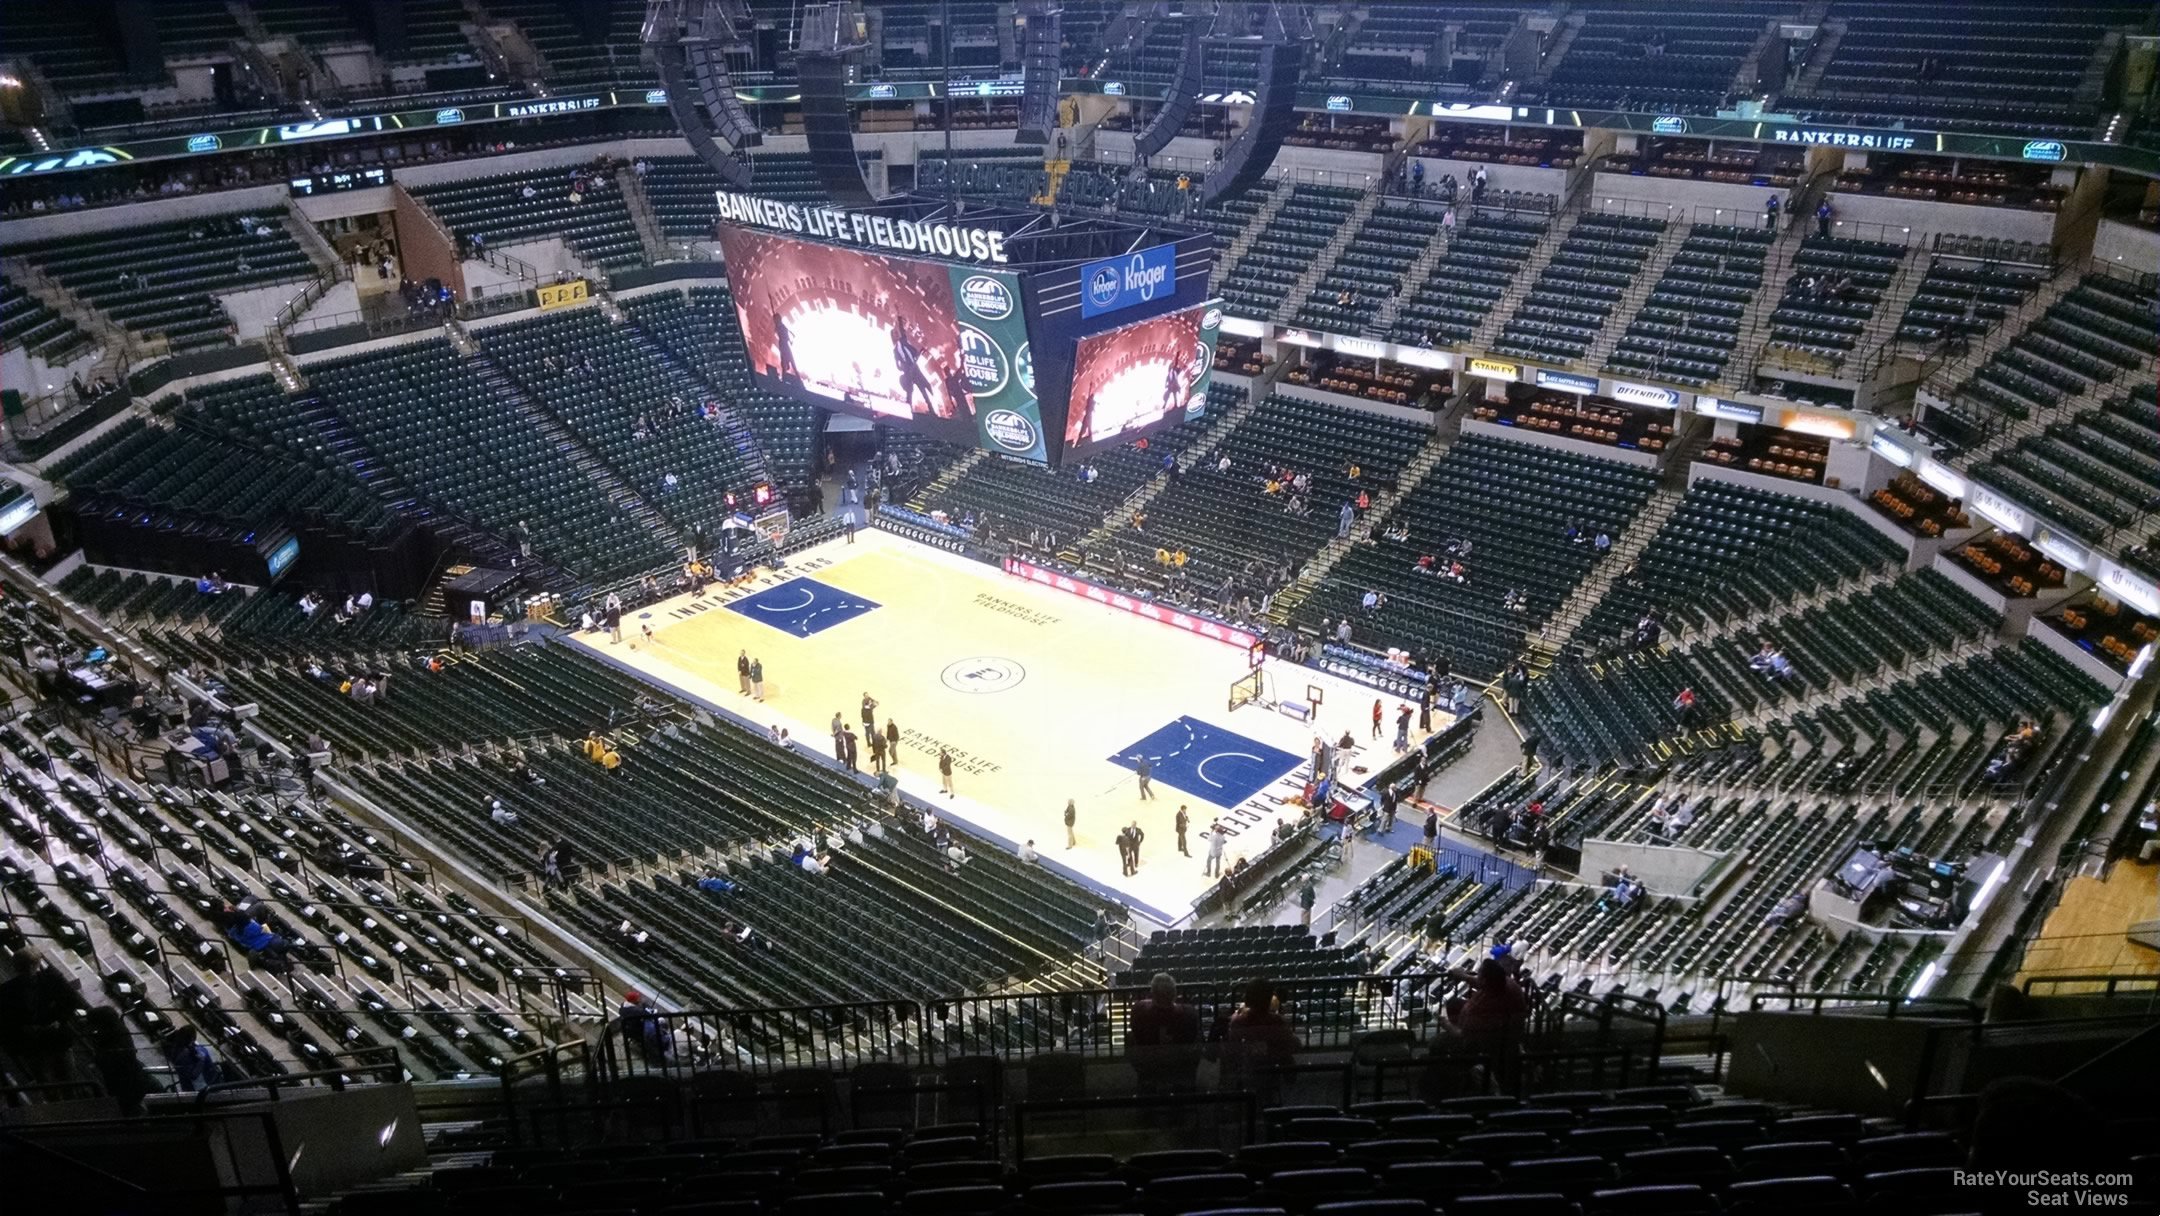 Bankers Life Fieldhouse Seating Chart With Seat Numbers